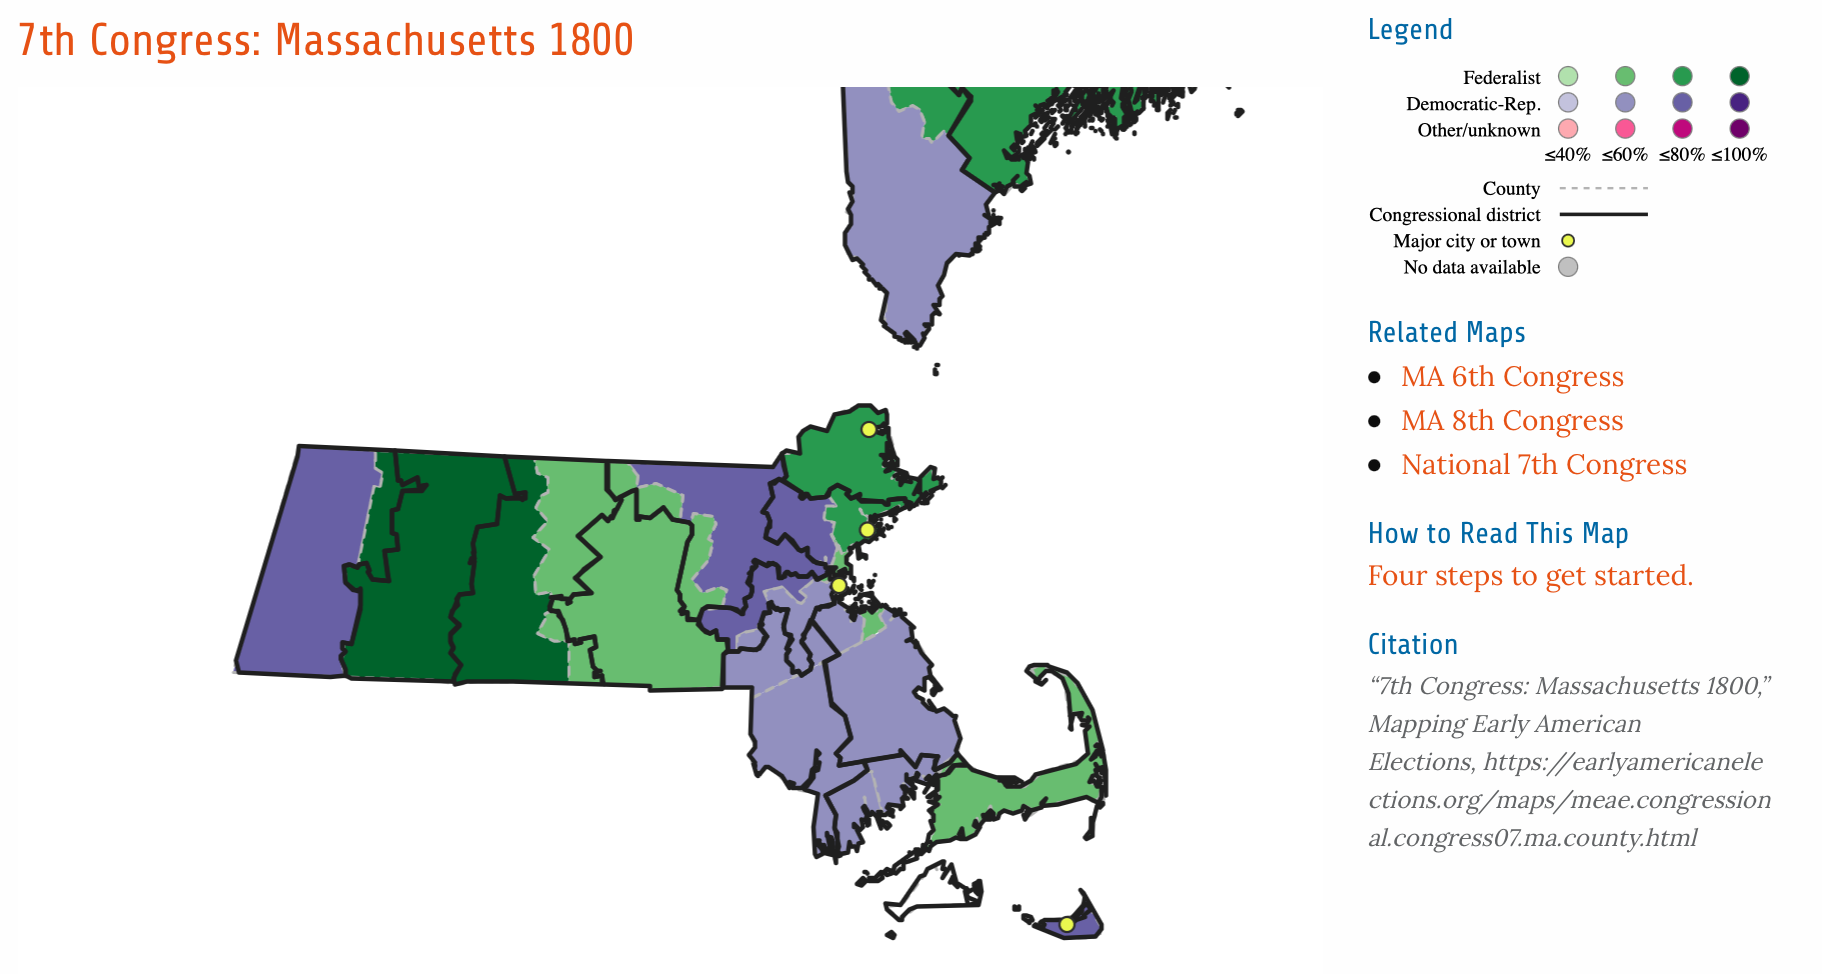 A map from Mapping Early American Elections